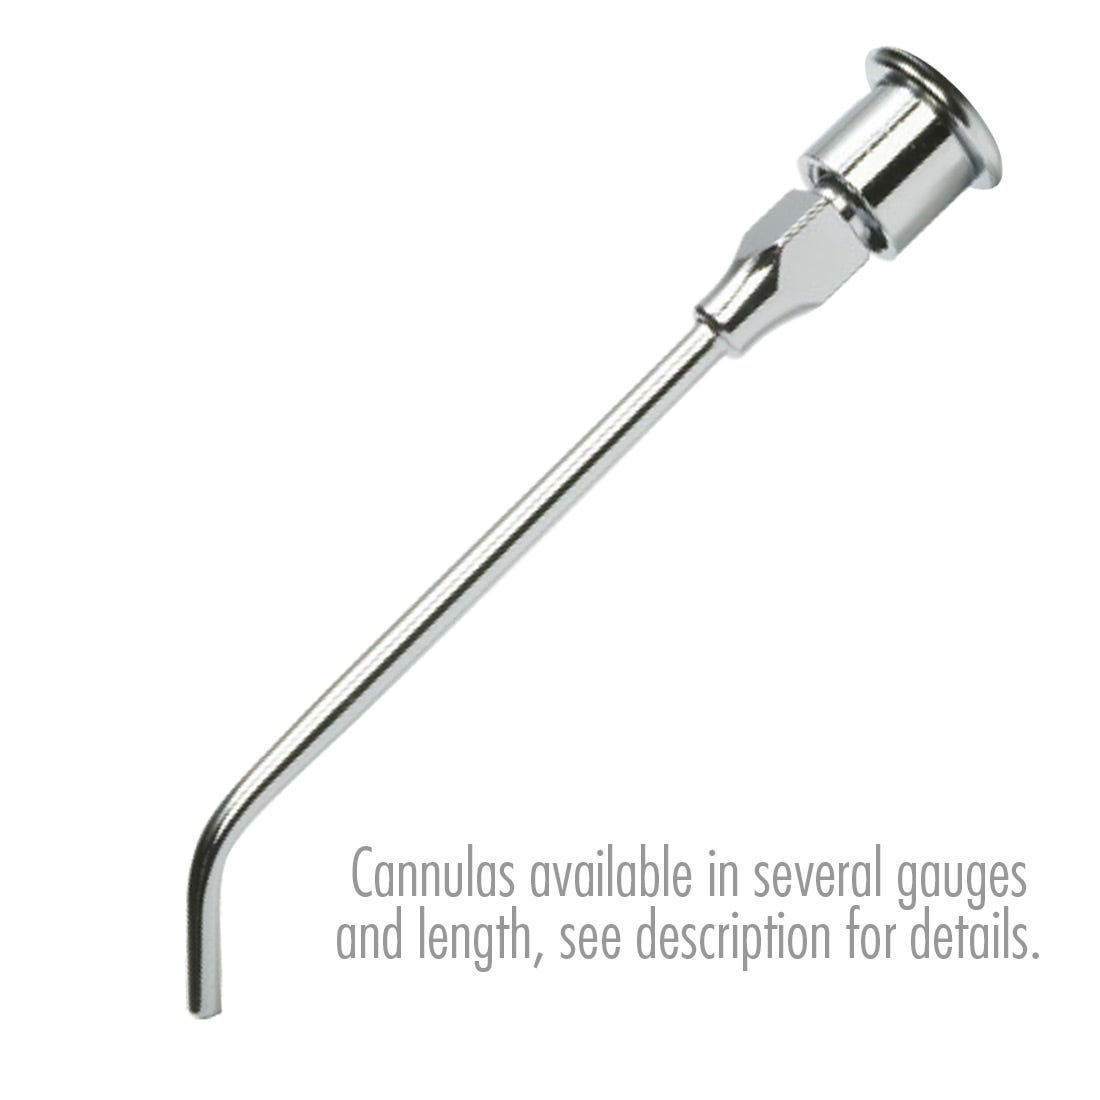 ACE Irrigation Cannula - Stainless Steel 12G x 1-1/4", 45 degree angle